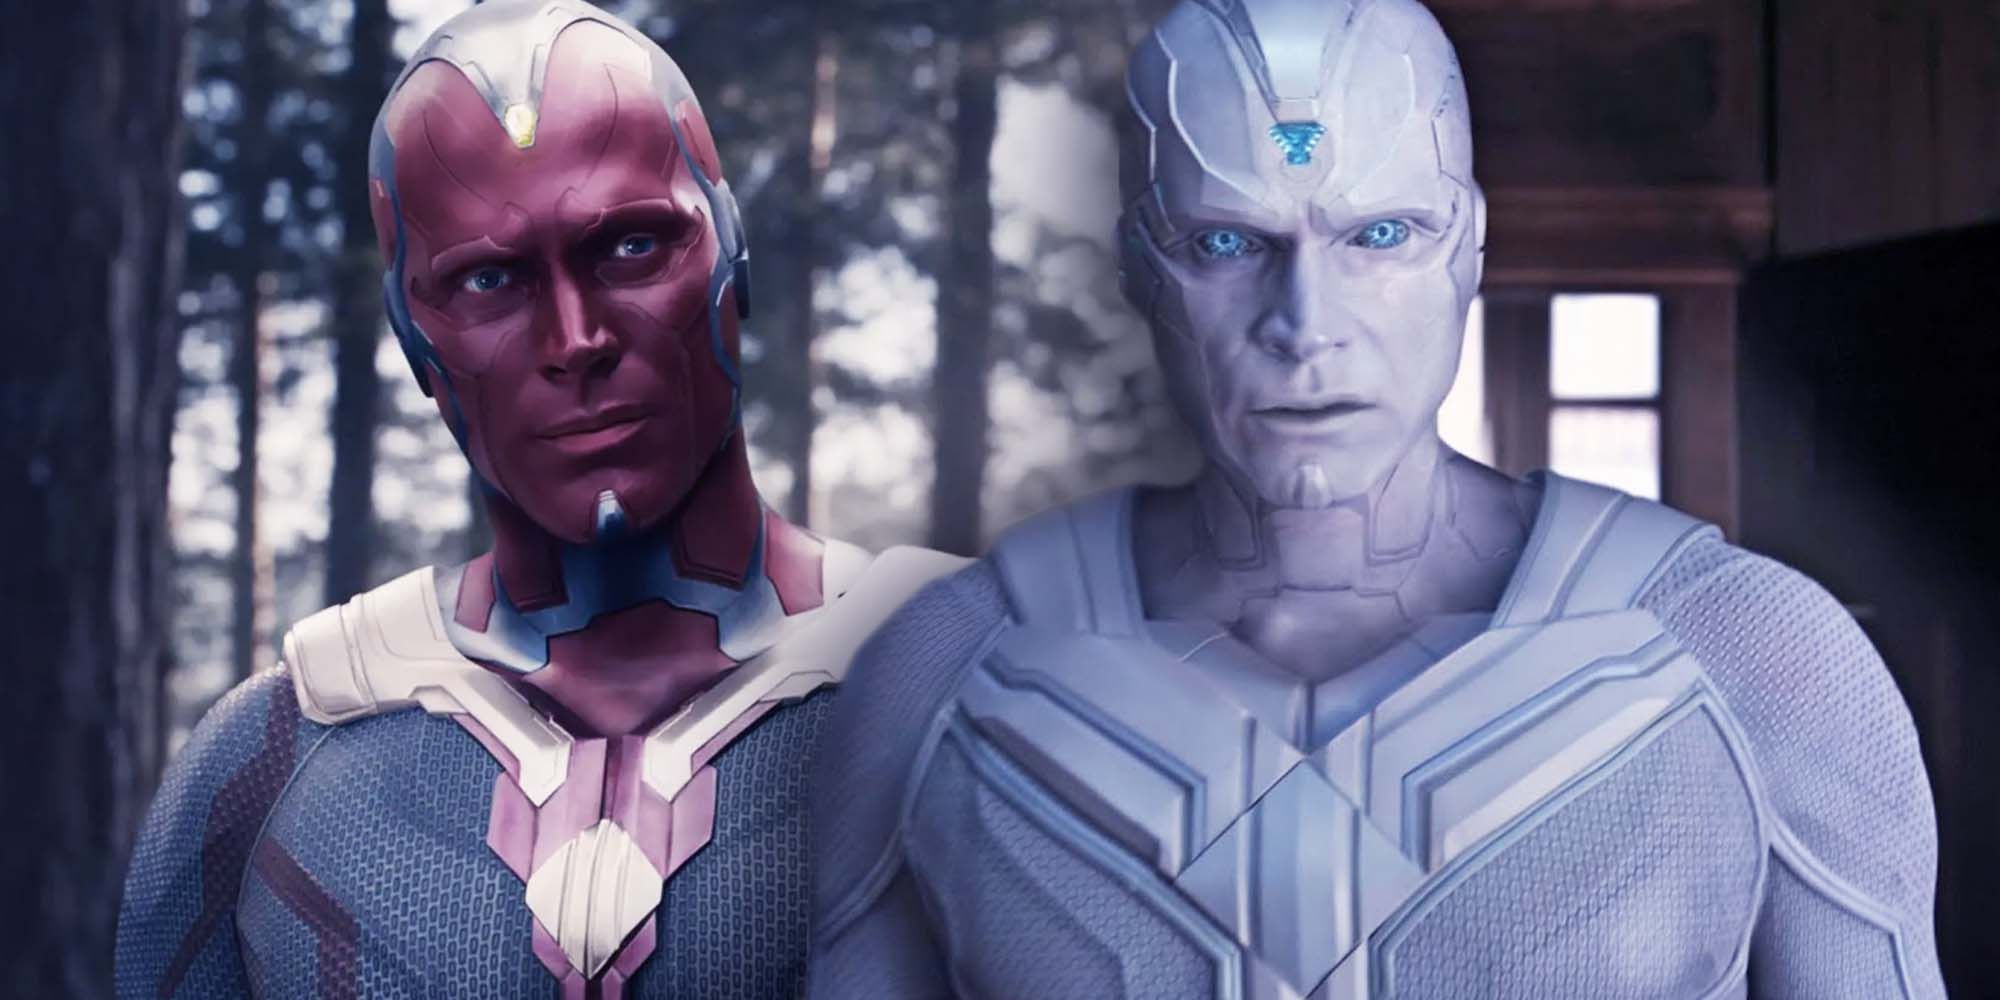 Paul Bettany as Vision in the MCU in Avengers and WandaVision.